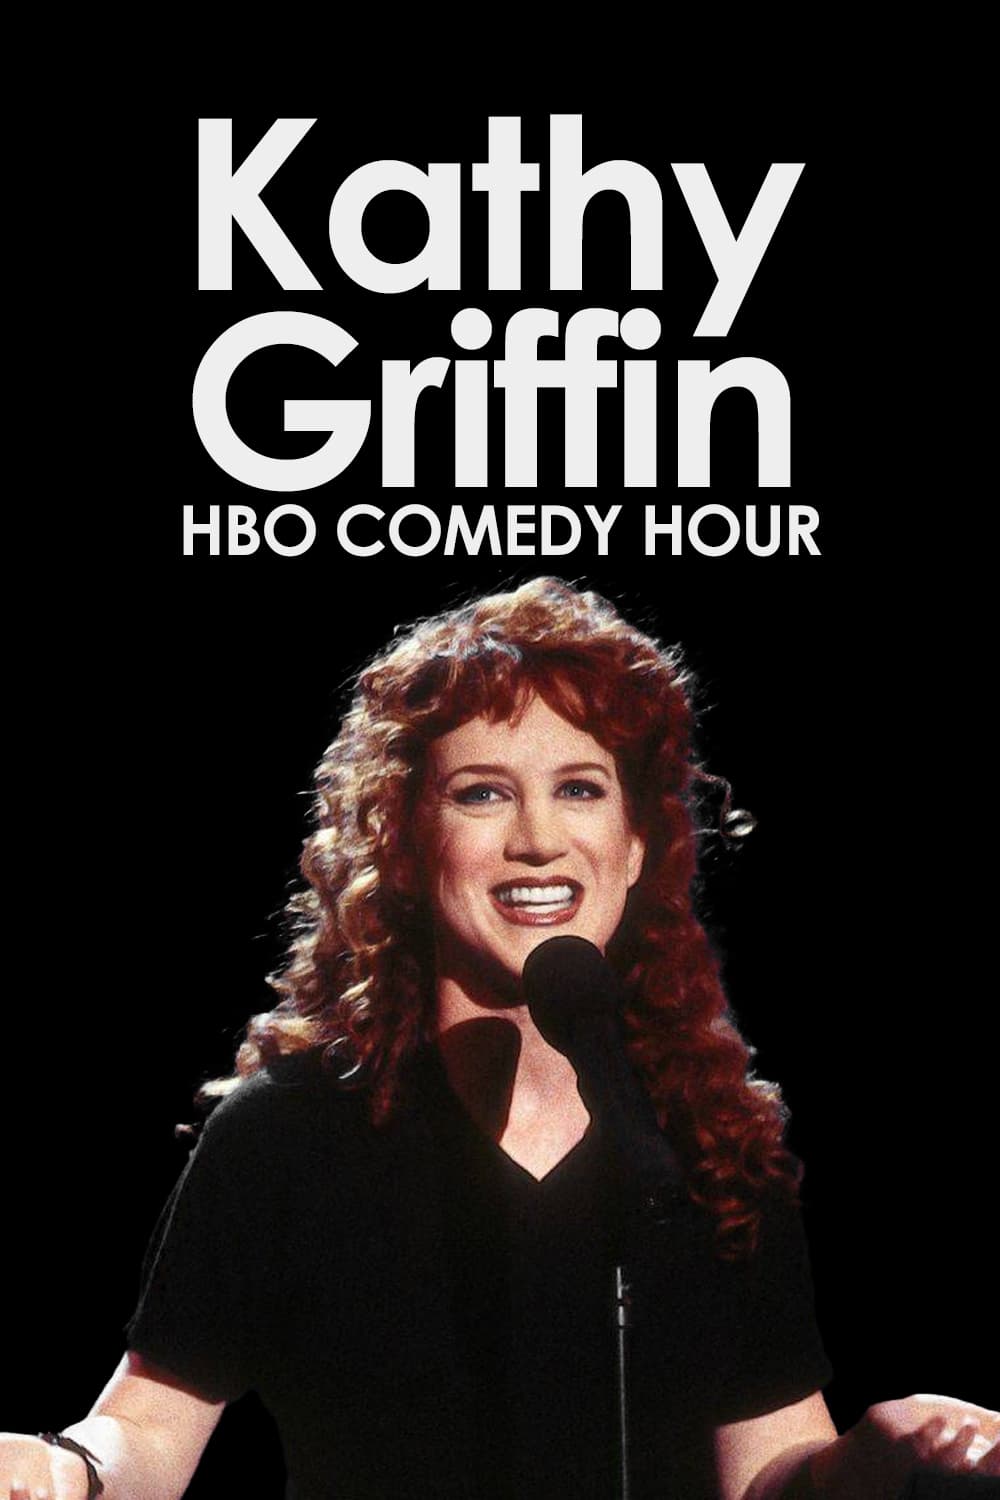 HBO Comedy Half-Hour: Kathy Griffin